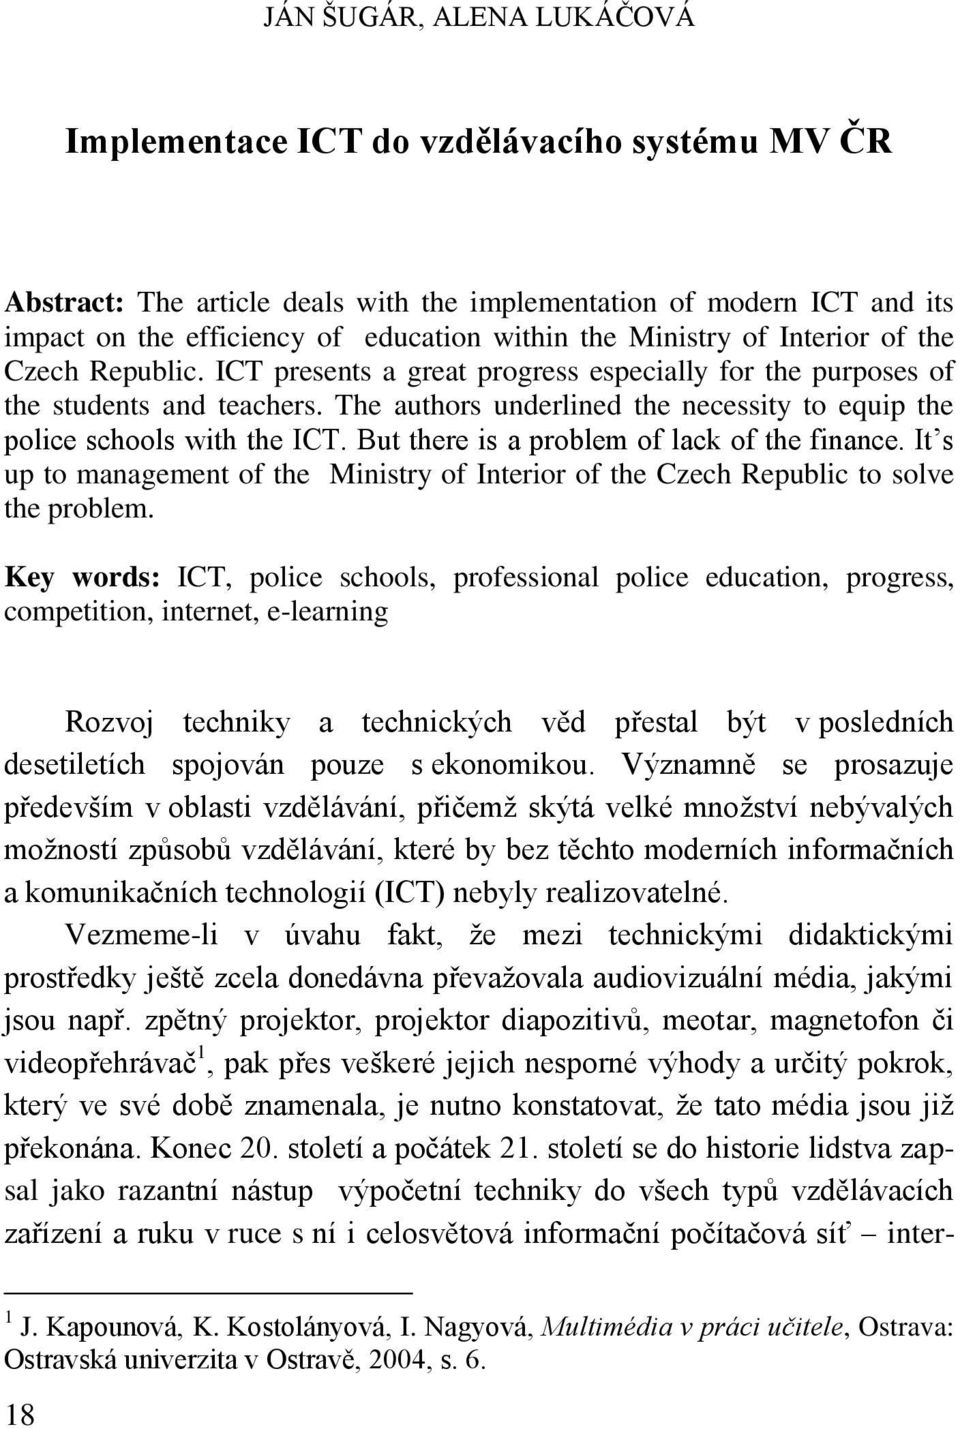 The authors underlined the necessity to equip the police schools with the ICT. But there is a problem of lack of the finance.